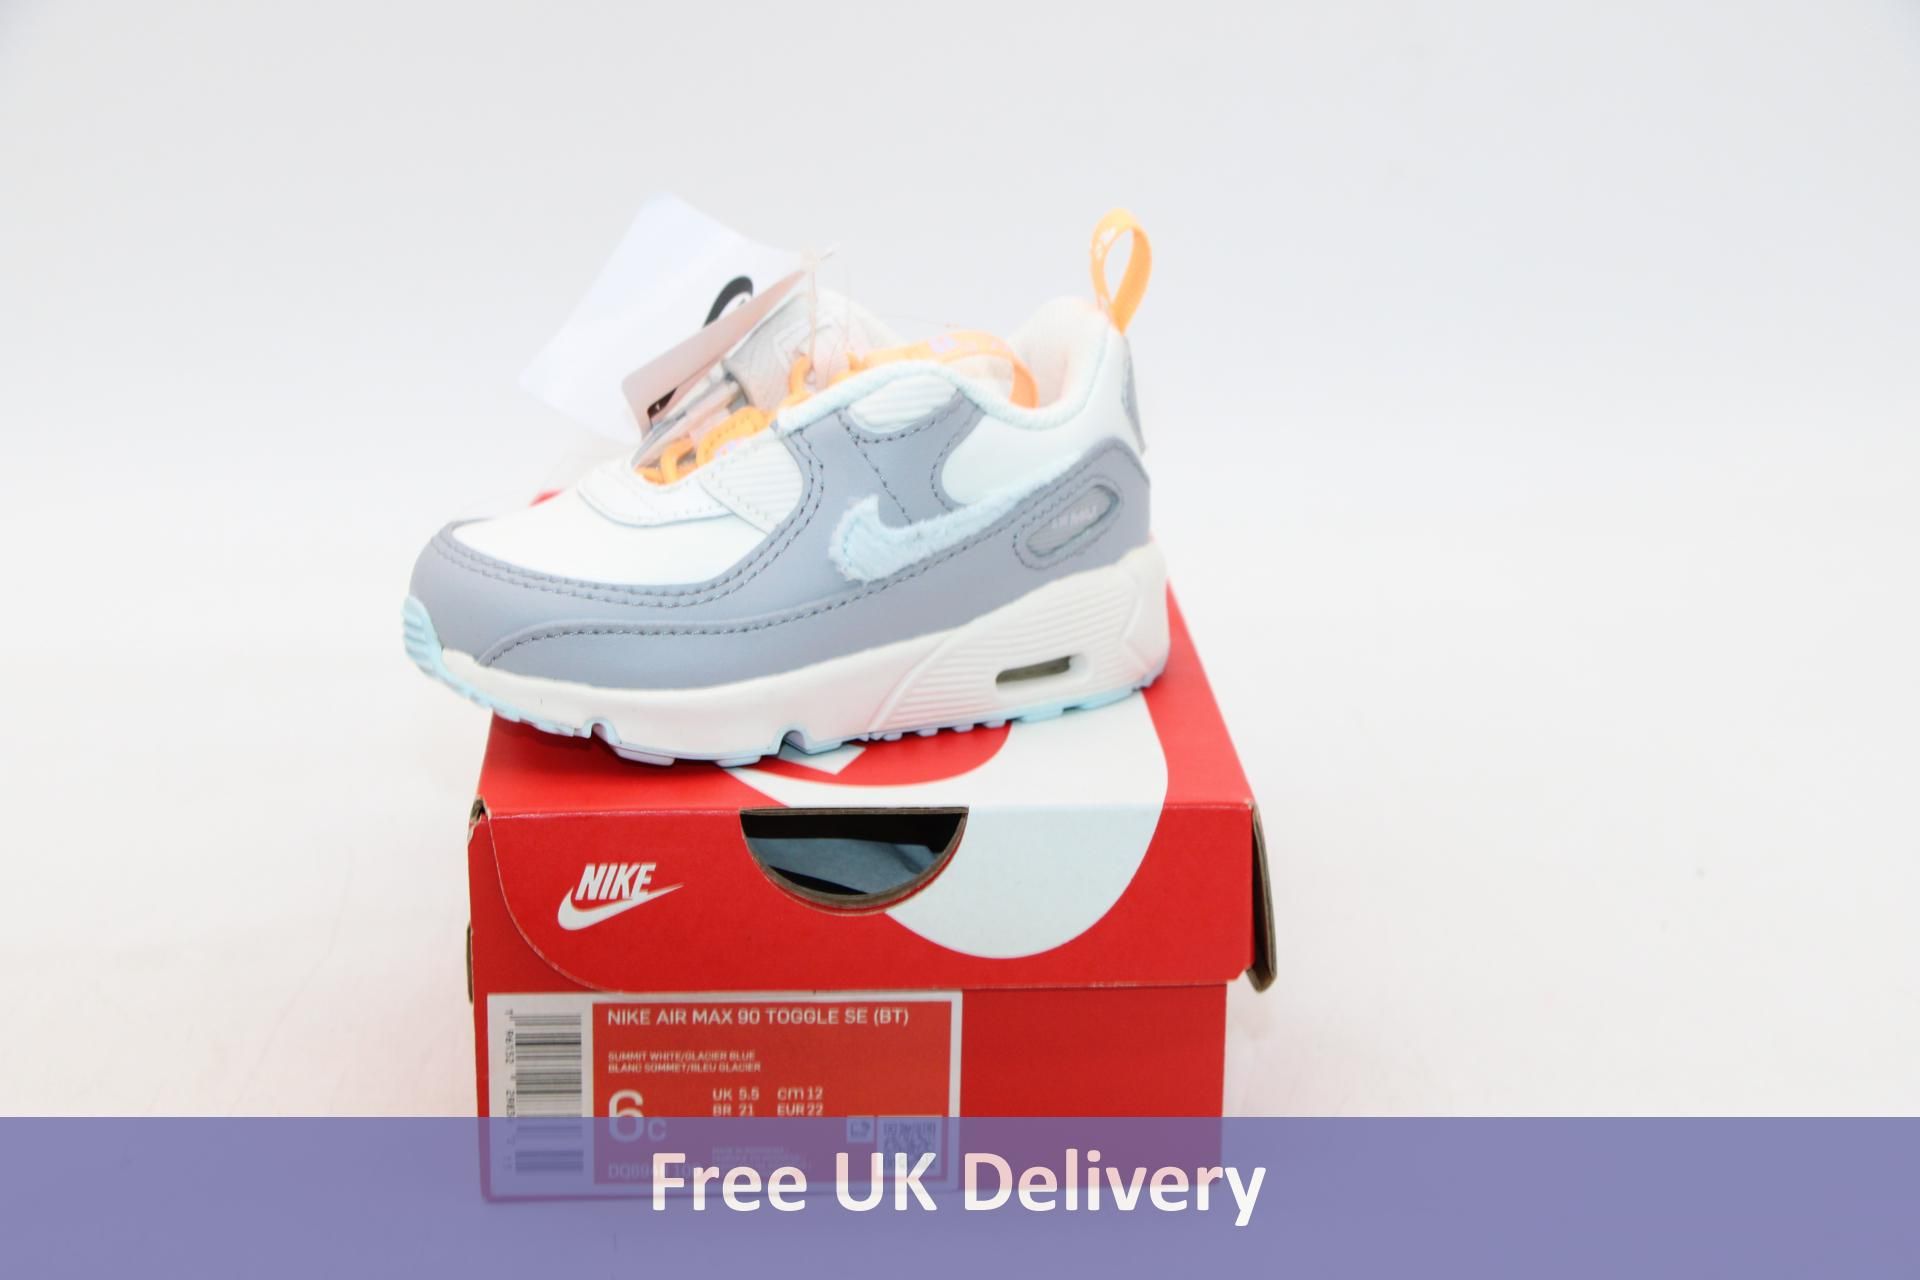 Two Pairs Nike Kids Trainers to include 1x Air Max 90 Toggle, White/Blue, UK 5.5, 1x MD Valiant TDV,